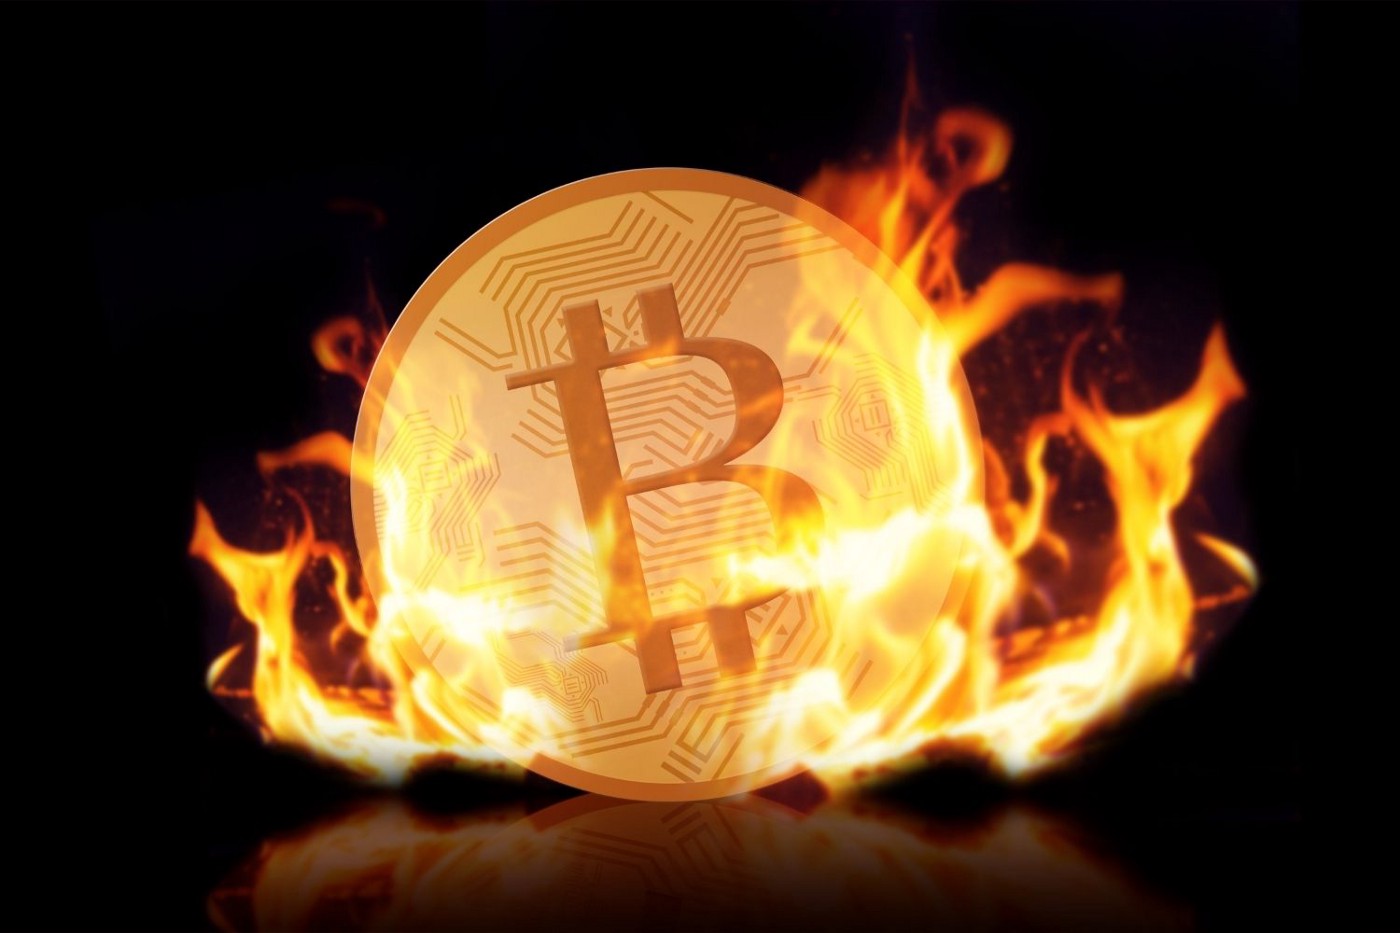 Image of a Bitcoin on fire.